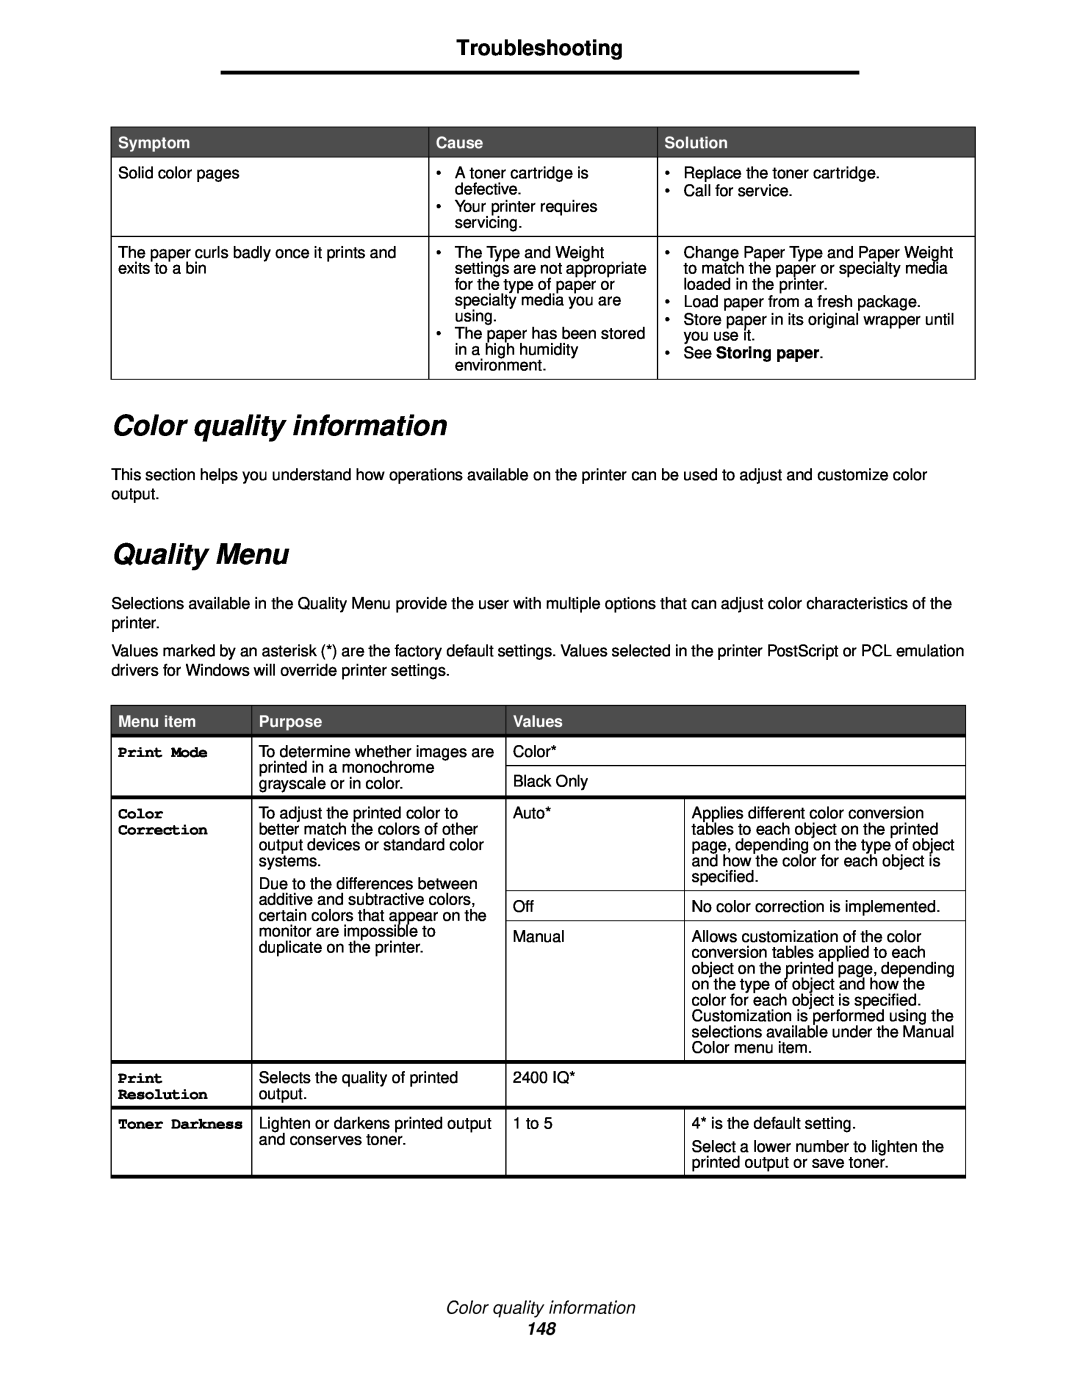 Lexmark 920 manual Color quality information, Quality Menu, Troubleshooting, See Storing paper 